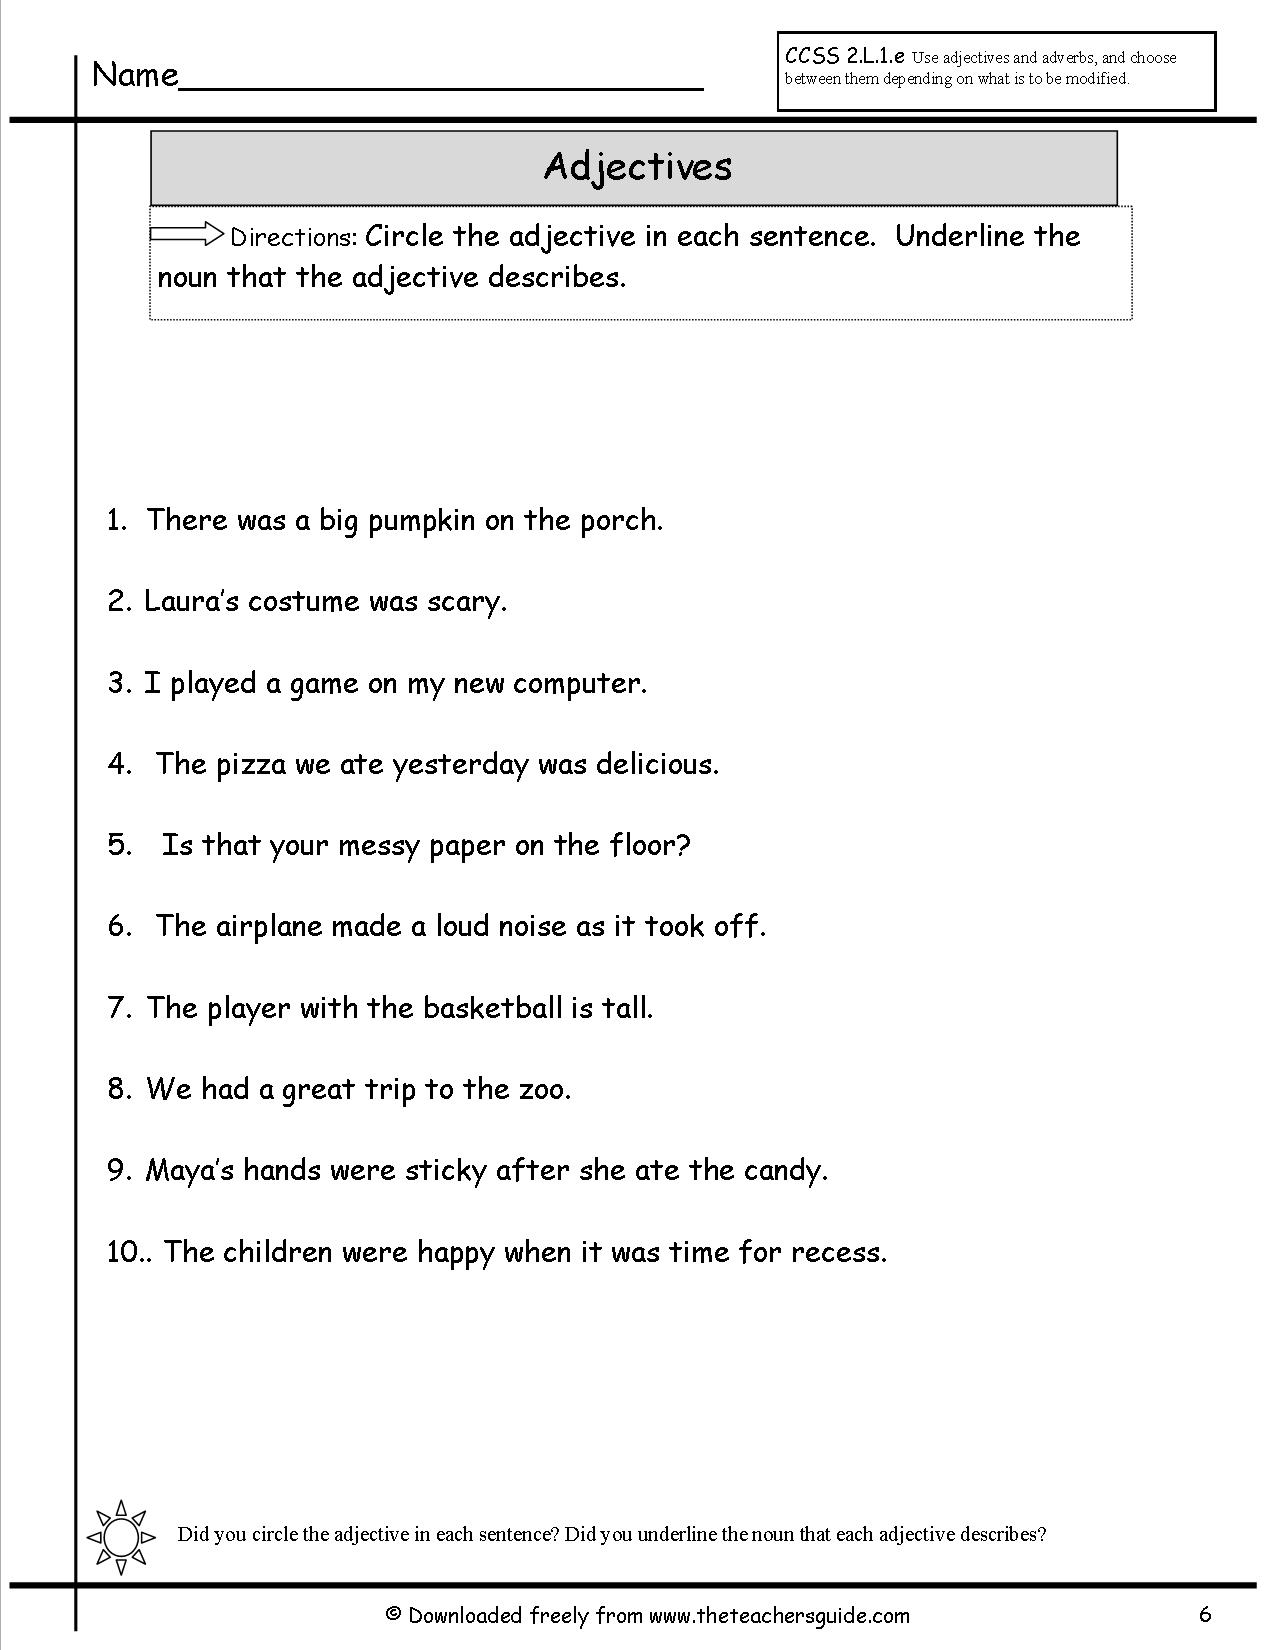 15 Best Images Of Nouns And Adjectives worksheets Identifying Nouns It Is A 4 Page Worksheet 